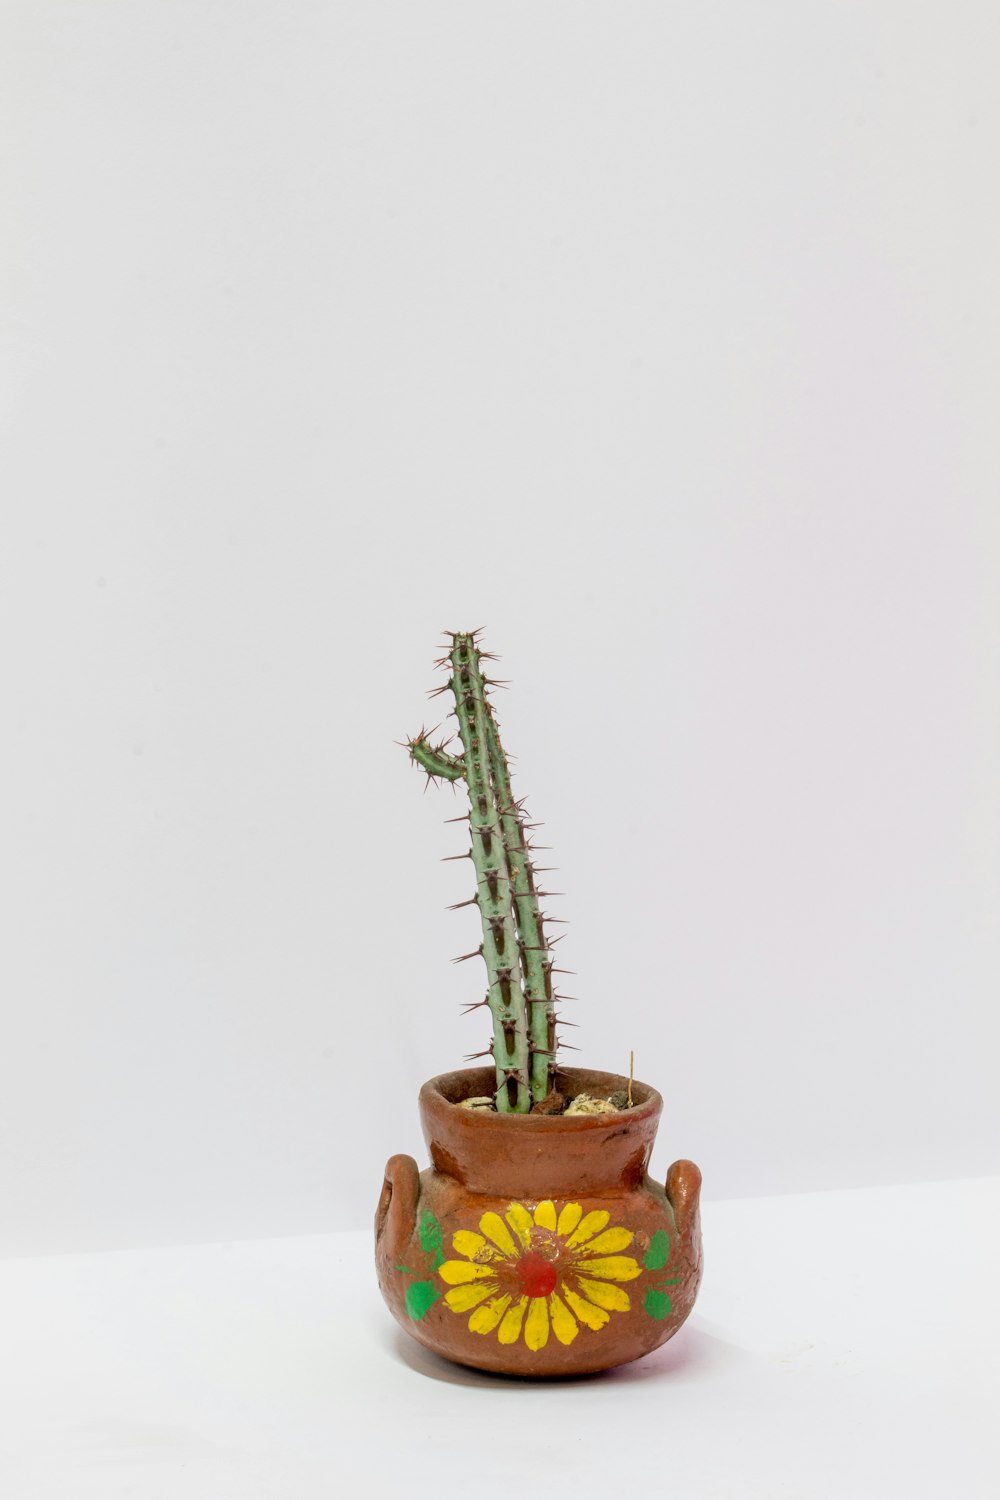 a potted plant with a yellow flower on it